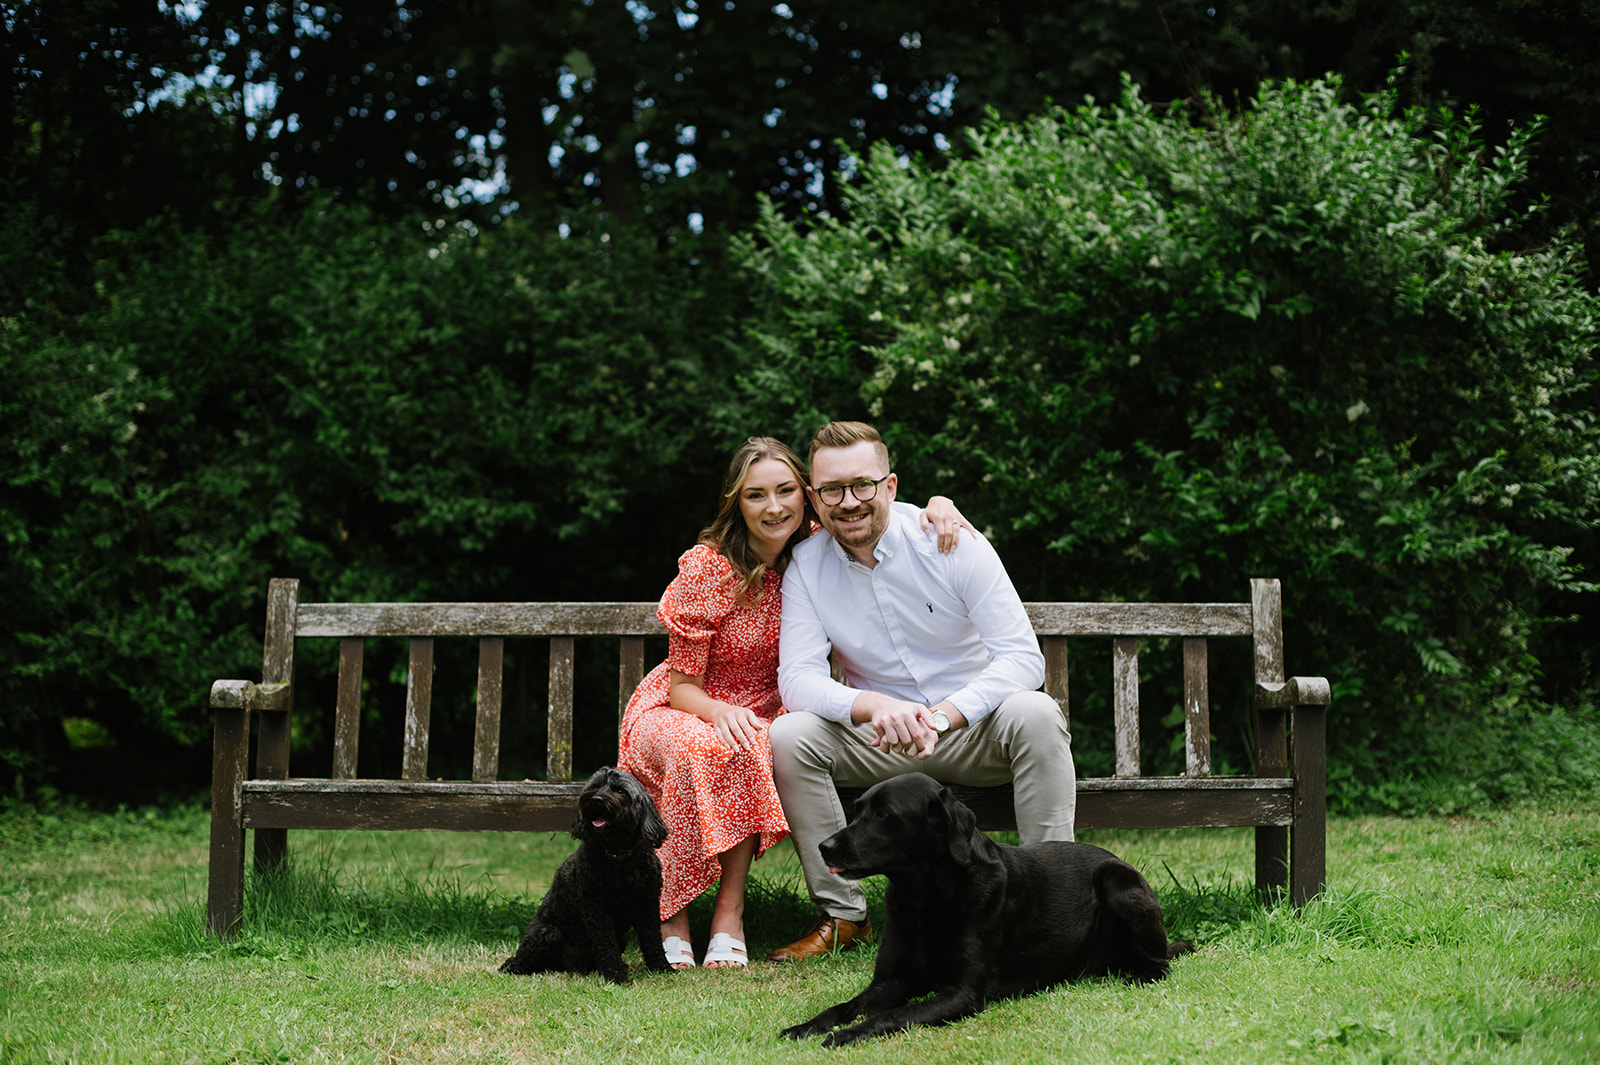 Couple seated on a bench with their 2 black dogs. Shes wearing a red dress, he's in a white shirt and chinos